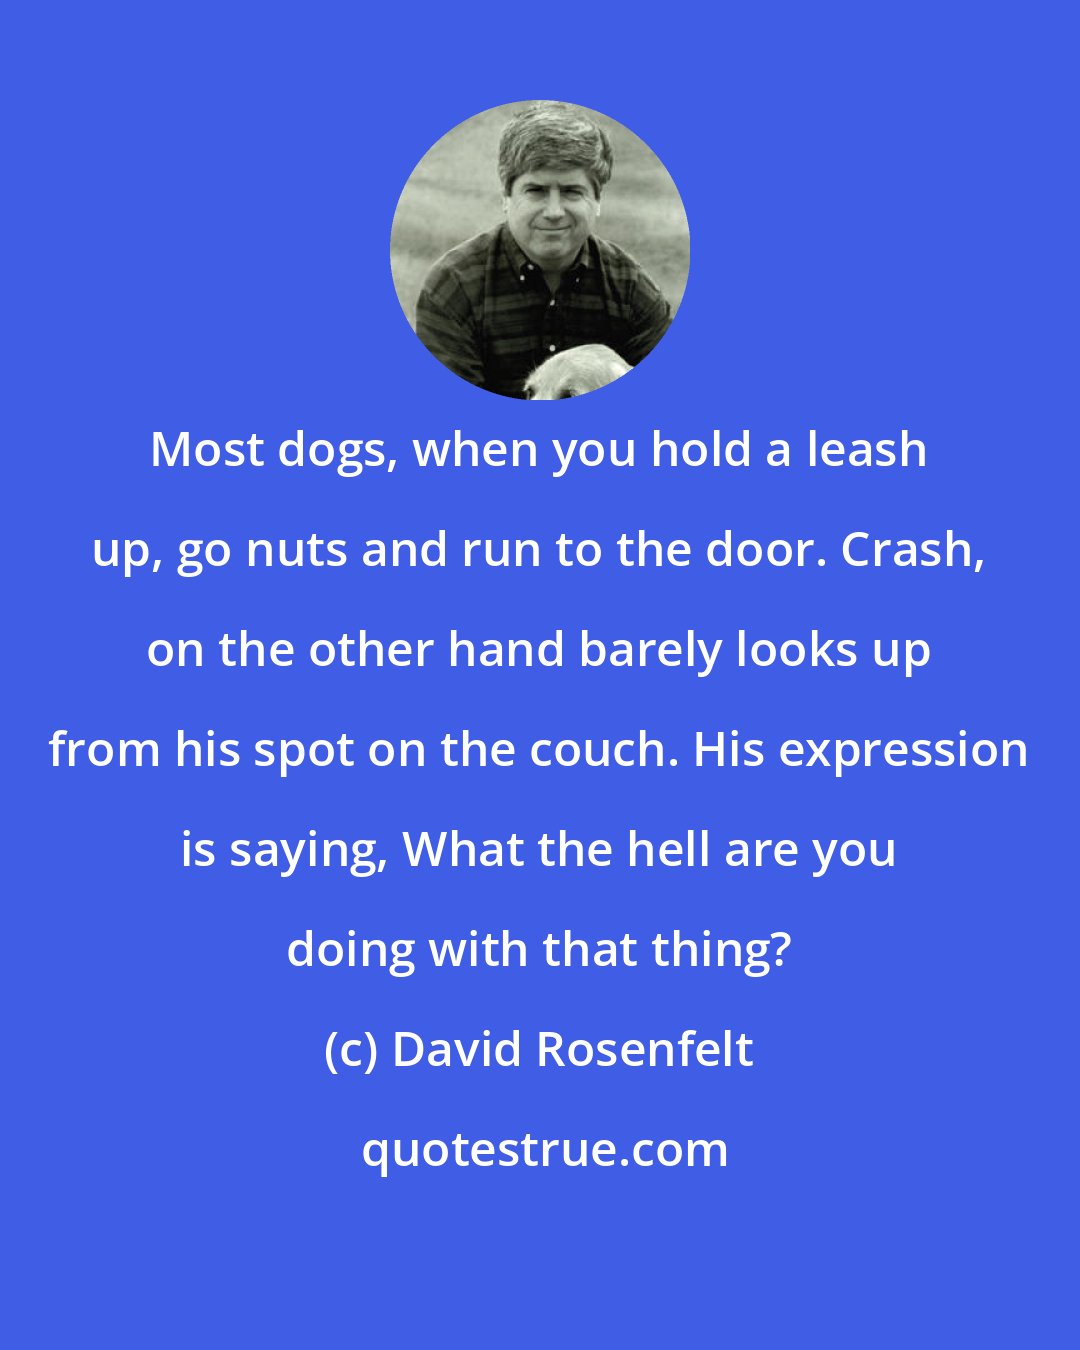 David Rosenfelt: Most dogs, when you hold a leash up, go nuts and run to the door. Crash, on the other hand barely looks up from his spot on the couch. His expression is saying, What the hell are you doing with that thing?